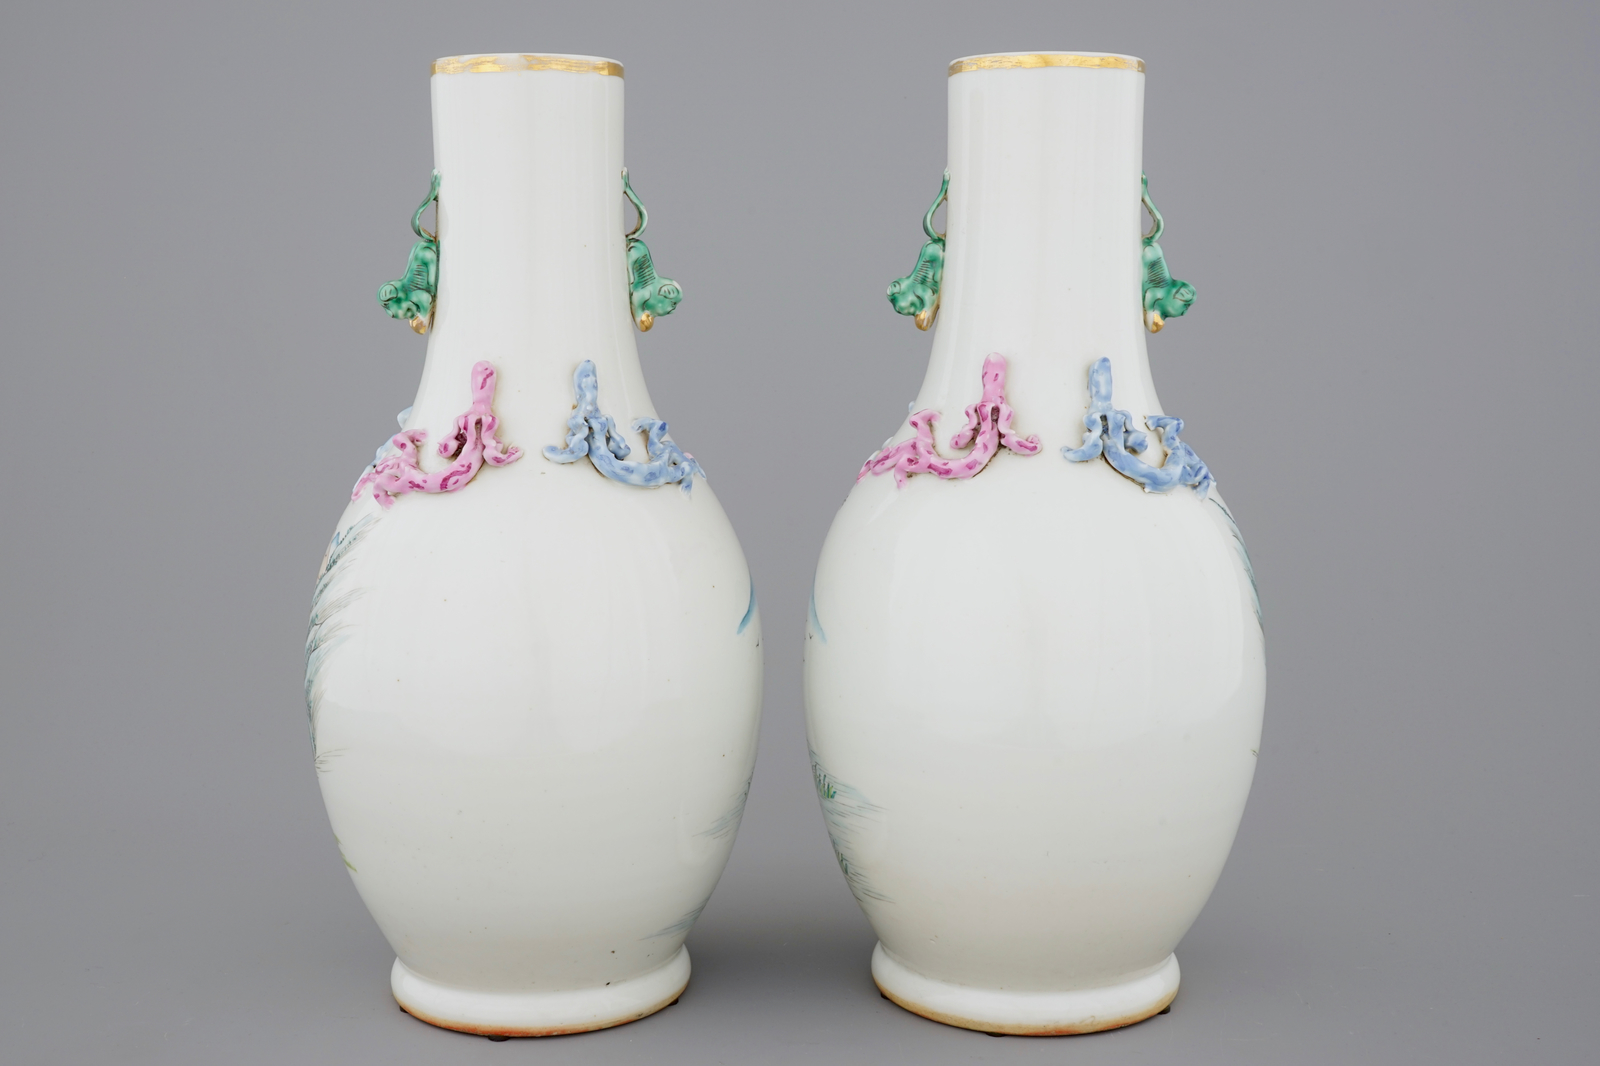 An unusual pair of Chinese famille rose landscape vases, early 20th C. H.: 46 cm - Dia.: 22 cm - Image 3 of 6